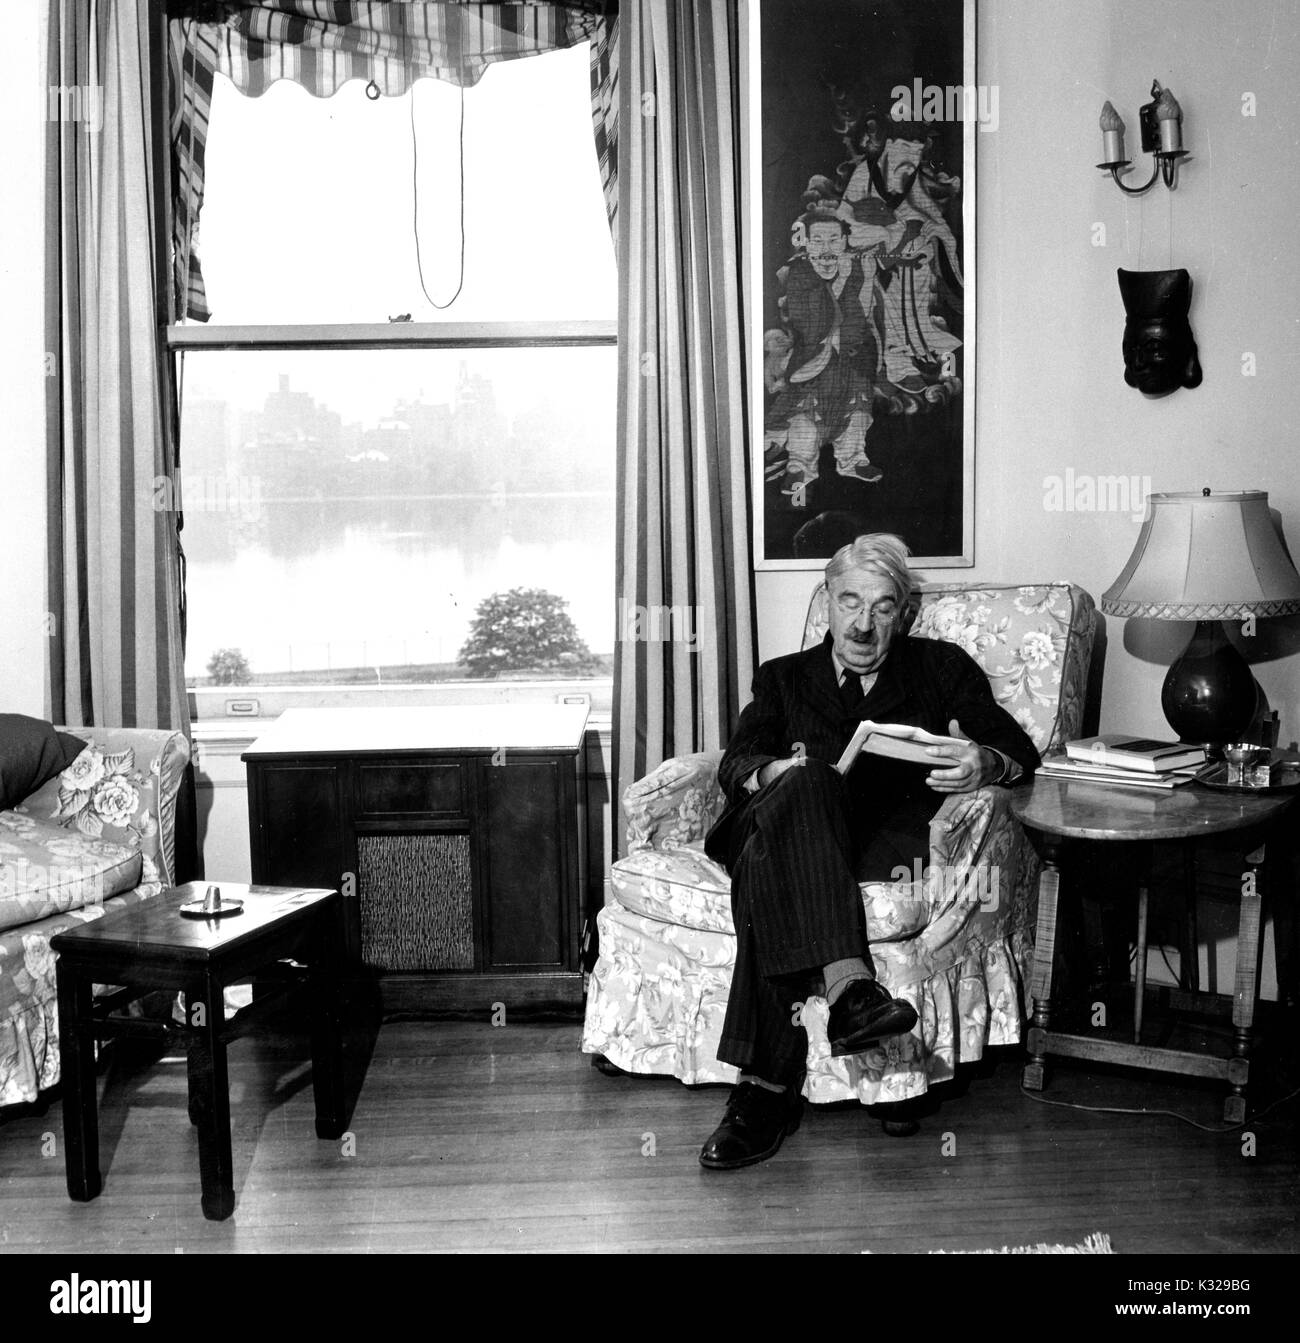 Candid portrait of American philosopher, psychologist, and educational reformer John Dewey sitting in his home reading, 1946. Stock Photo